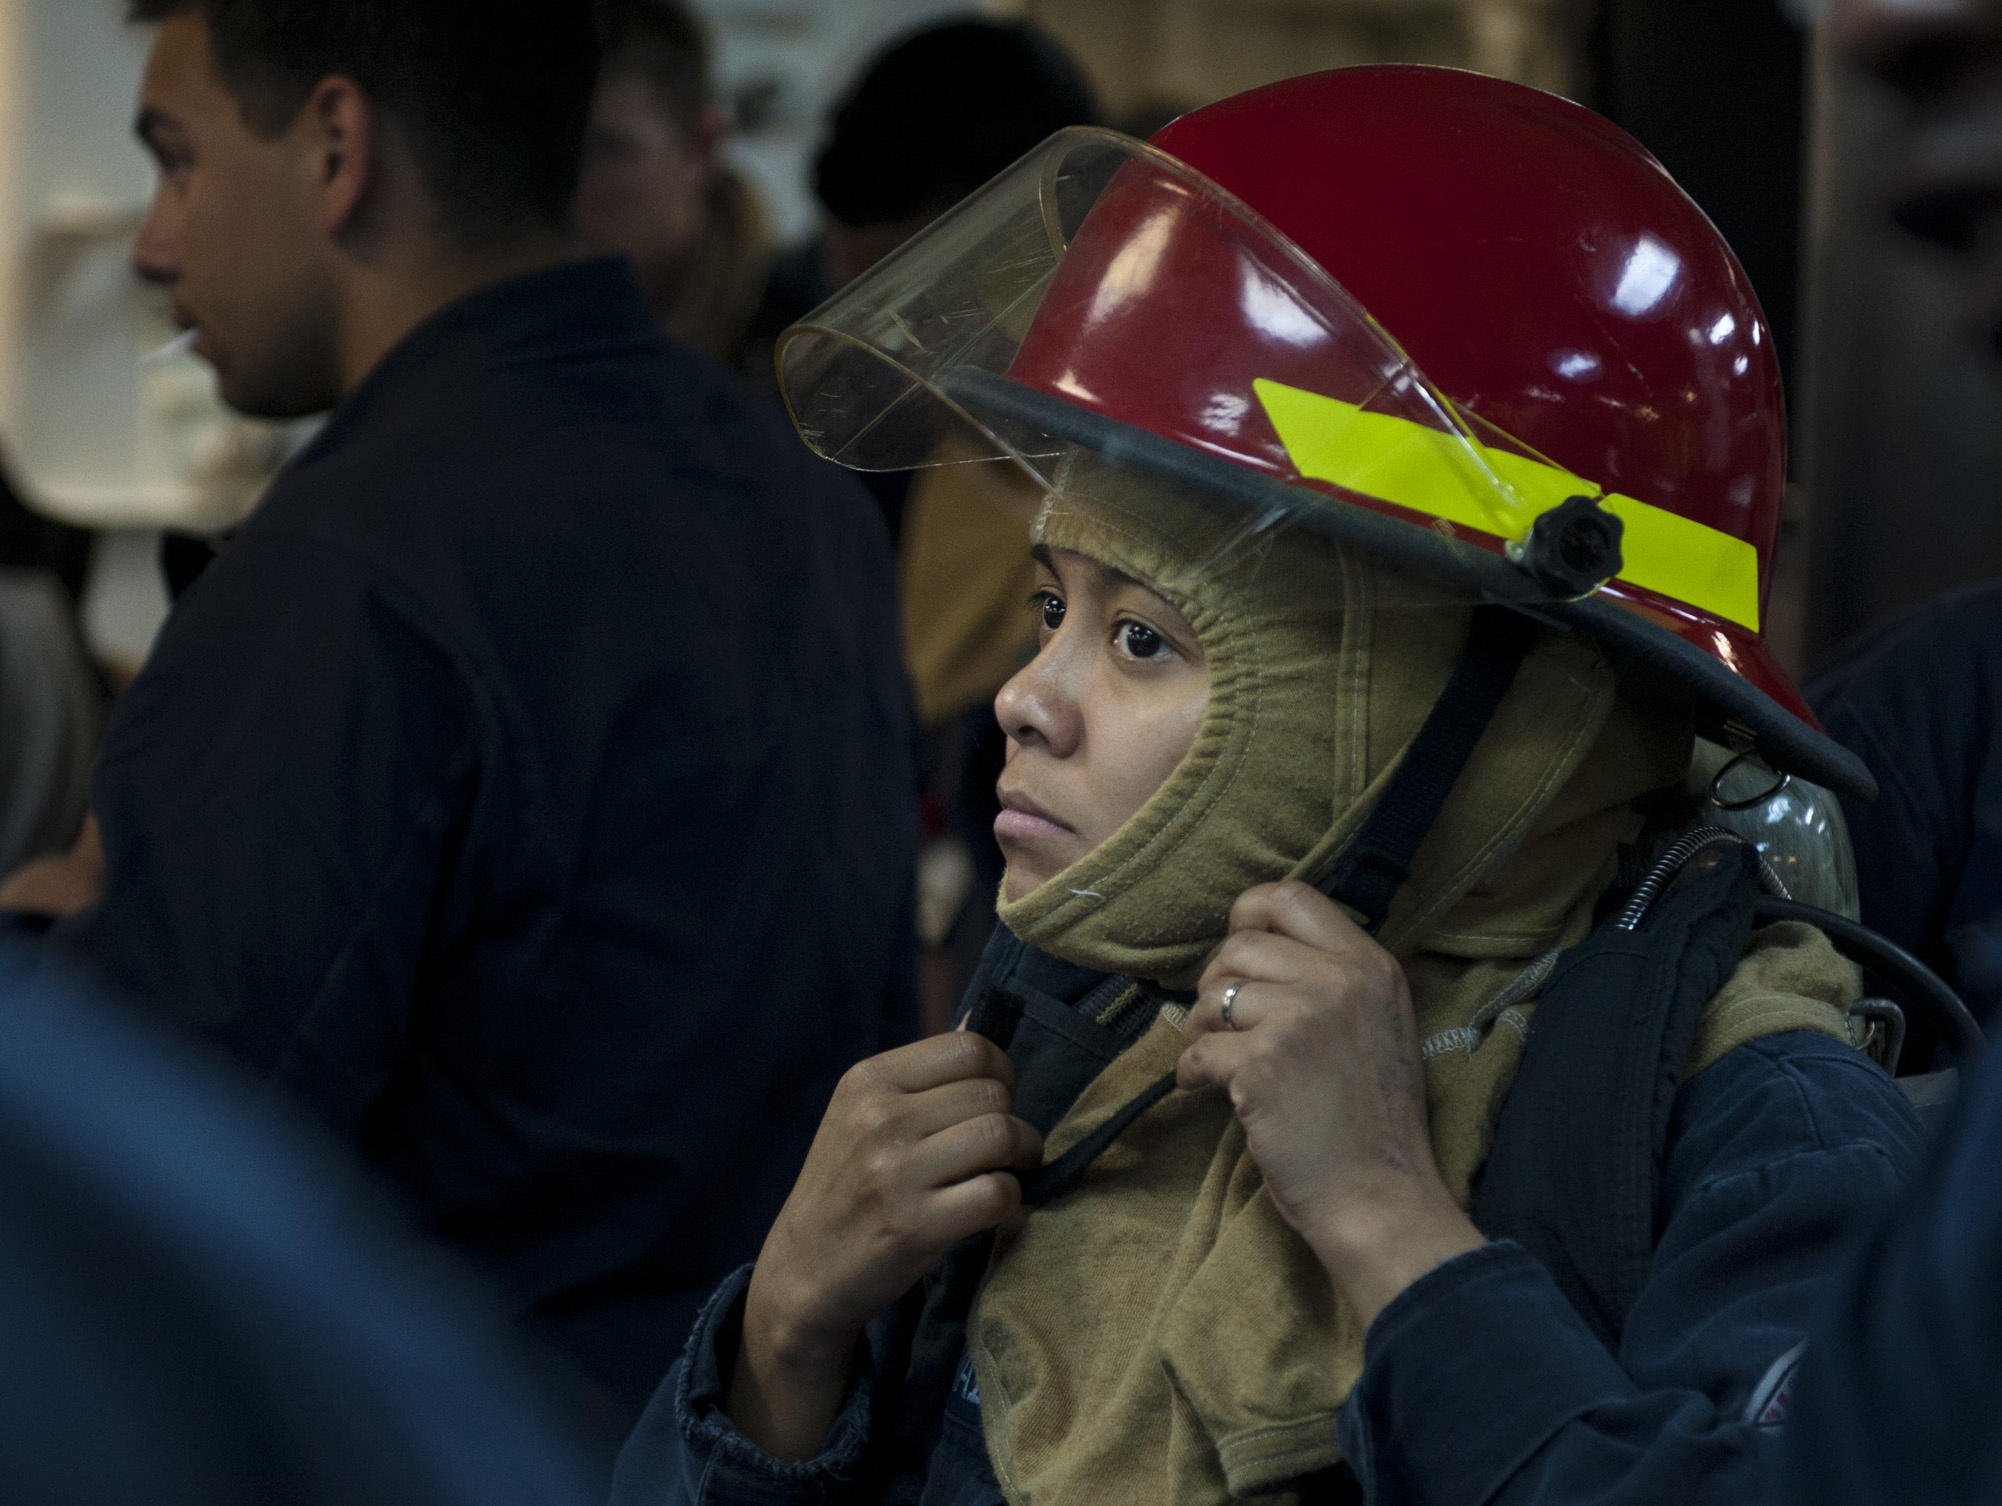 Gas Turbine System Technician (Electrical) 2nd Class Rosa Moran Vazquez puts on her firefighting gear during a general quarters drill on USS Arleigh Burke (DDG-51) on April 11, 2014. US Navy Photo